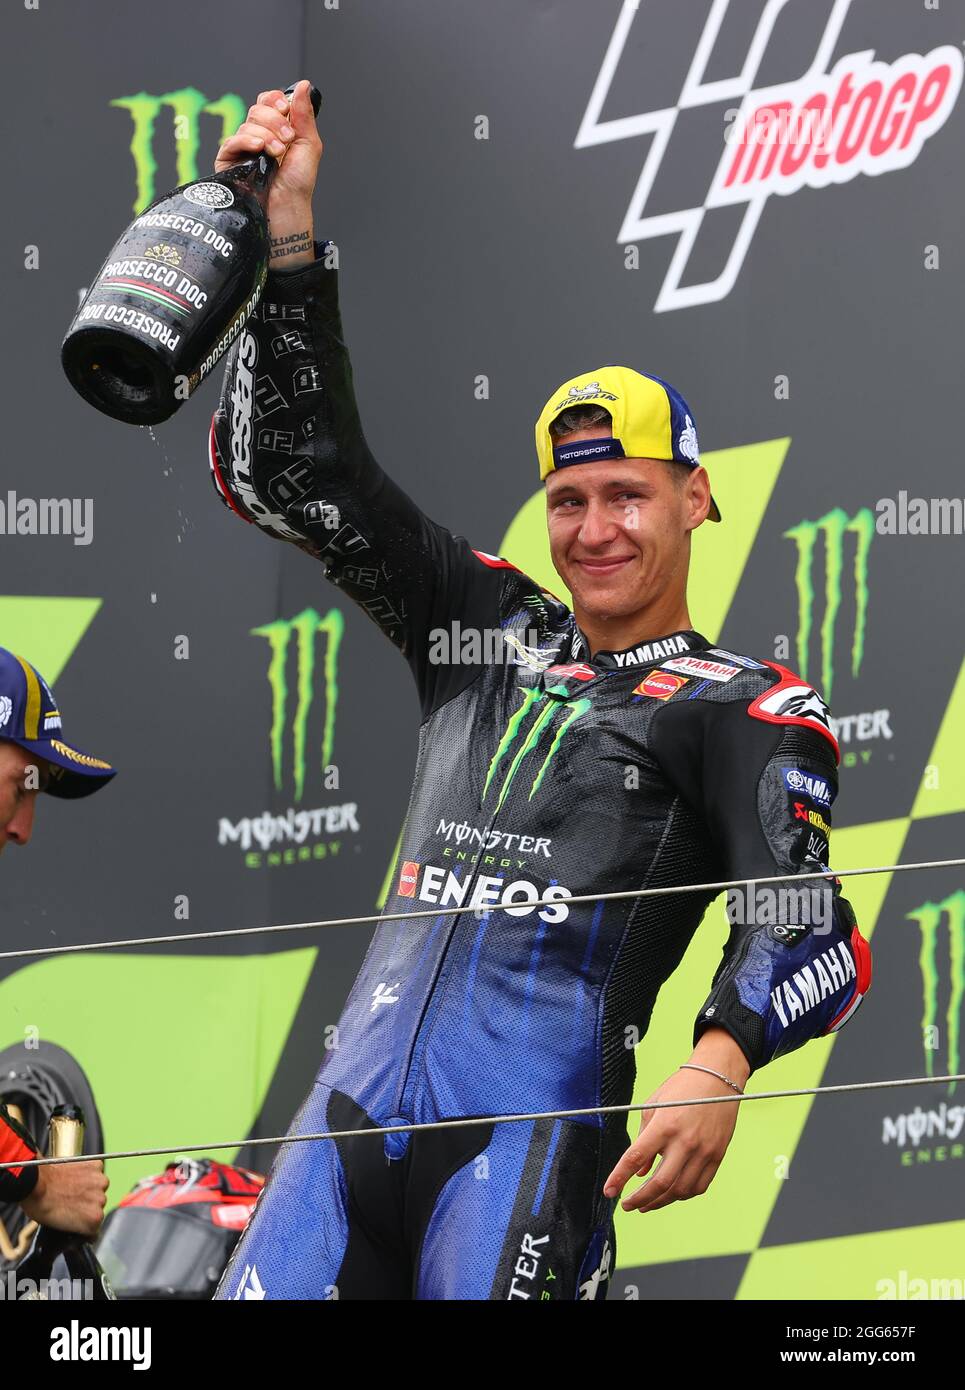 Silverstone, UK. 29th Aug 2021. Fabio Quartararo Monster Energy Yamaha MotoGP celebrates with champagne bottle on podium during the Monster Energy British Grand Prix MotoGP at Silverstone Circuit, Towcester, England on the 27 to 29 August 2021. Photo by Ian Hopgood. Credit: PRiME Media Images/Alamy Live News Stock Photo